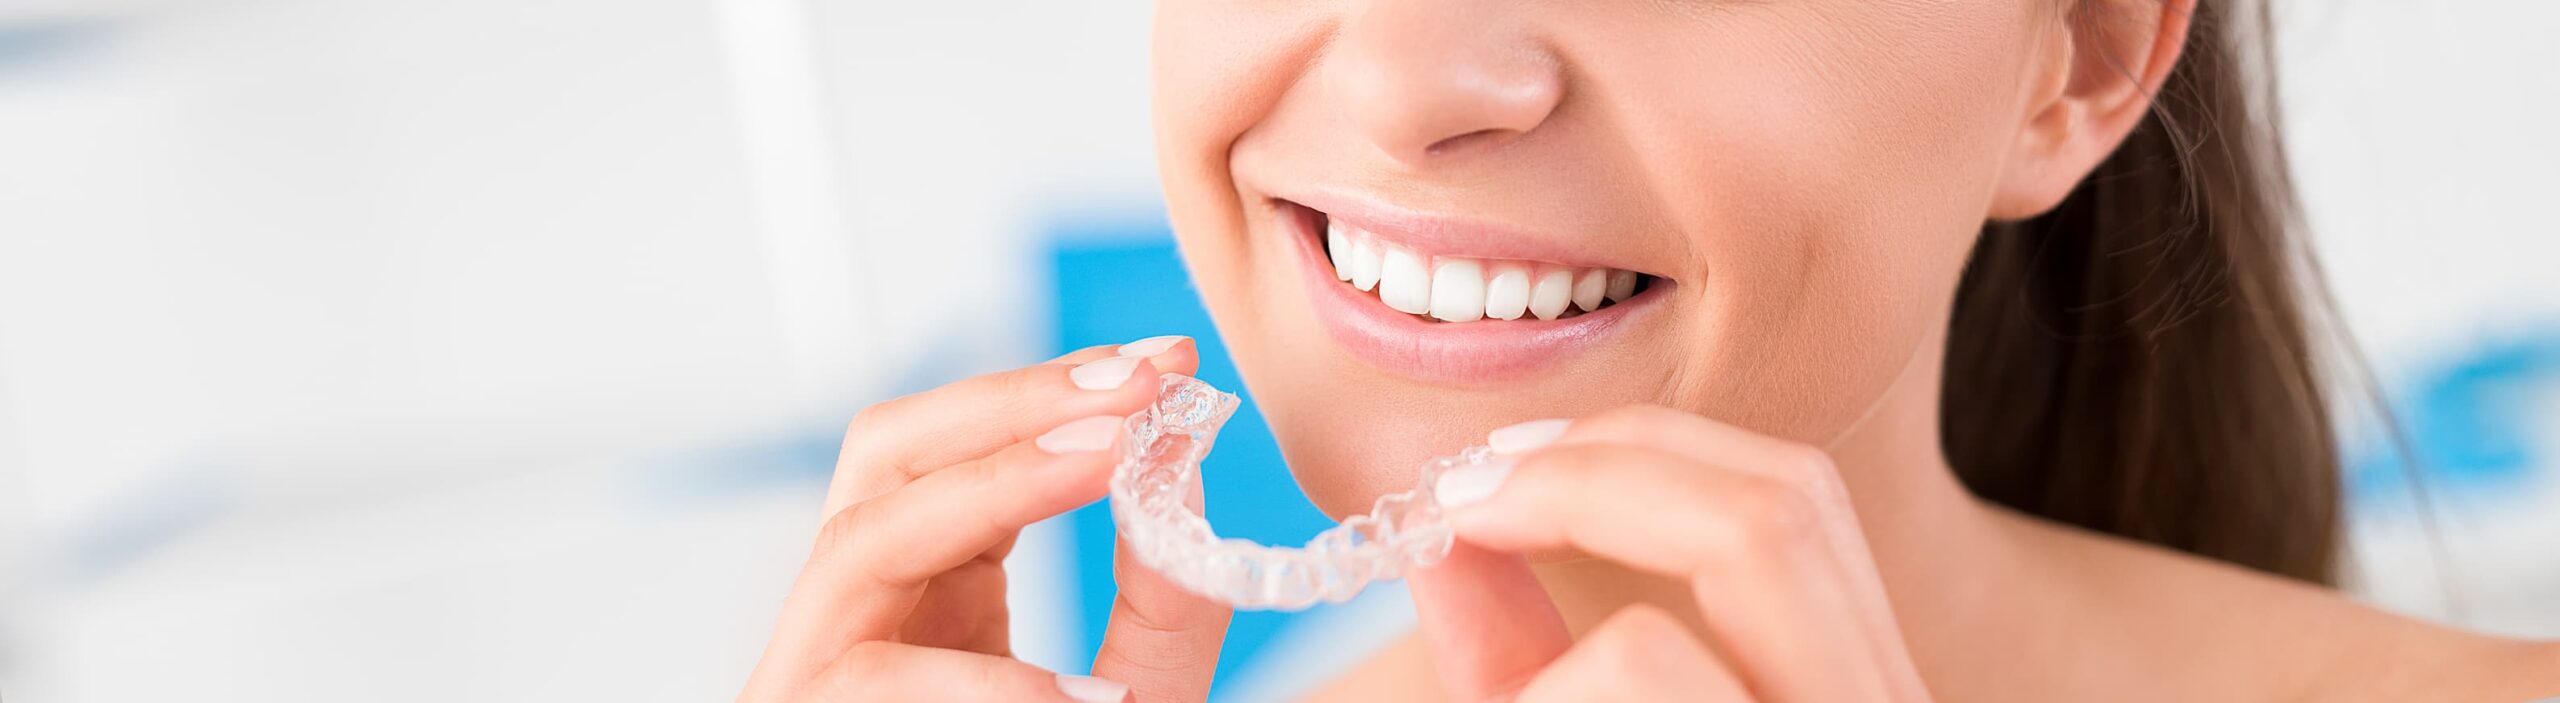 The Invisalign Procedure Explained in 3 Basic Stages